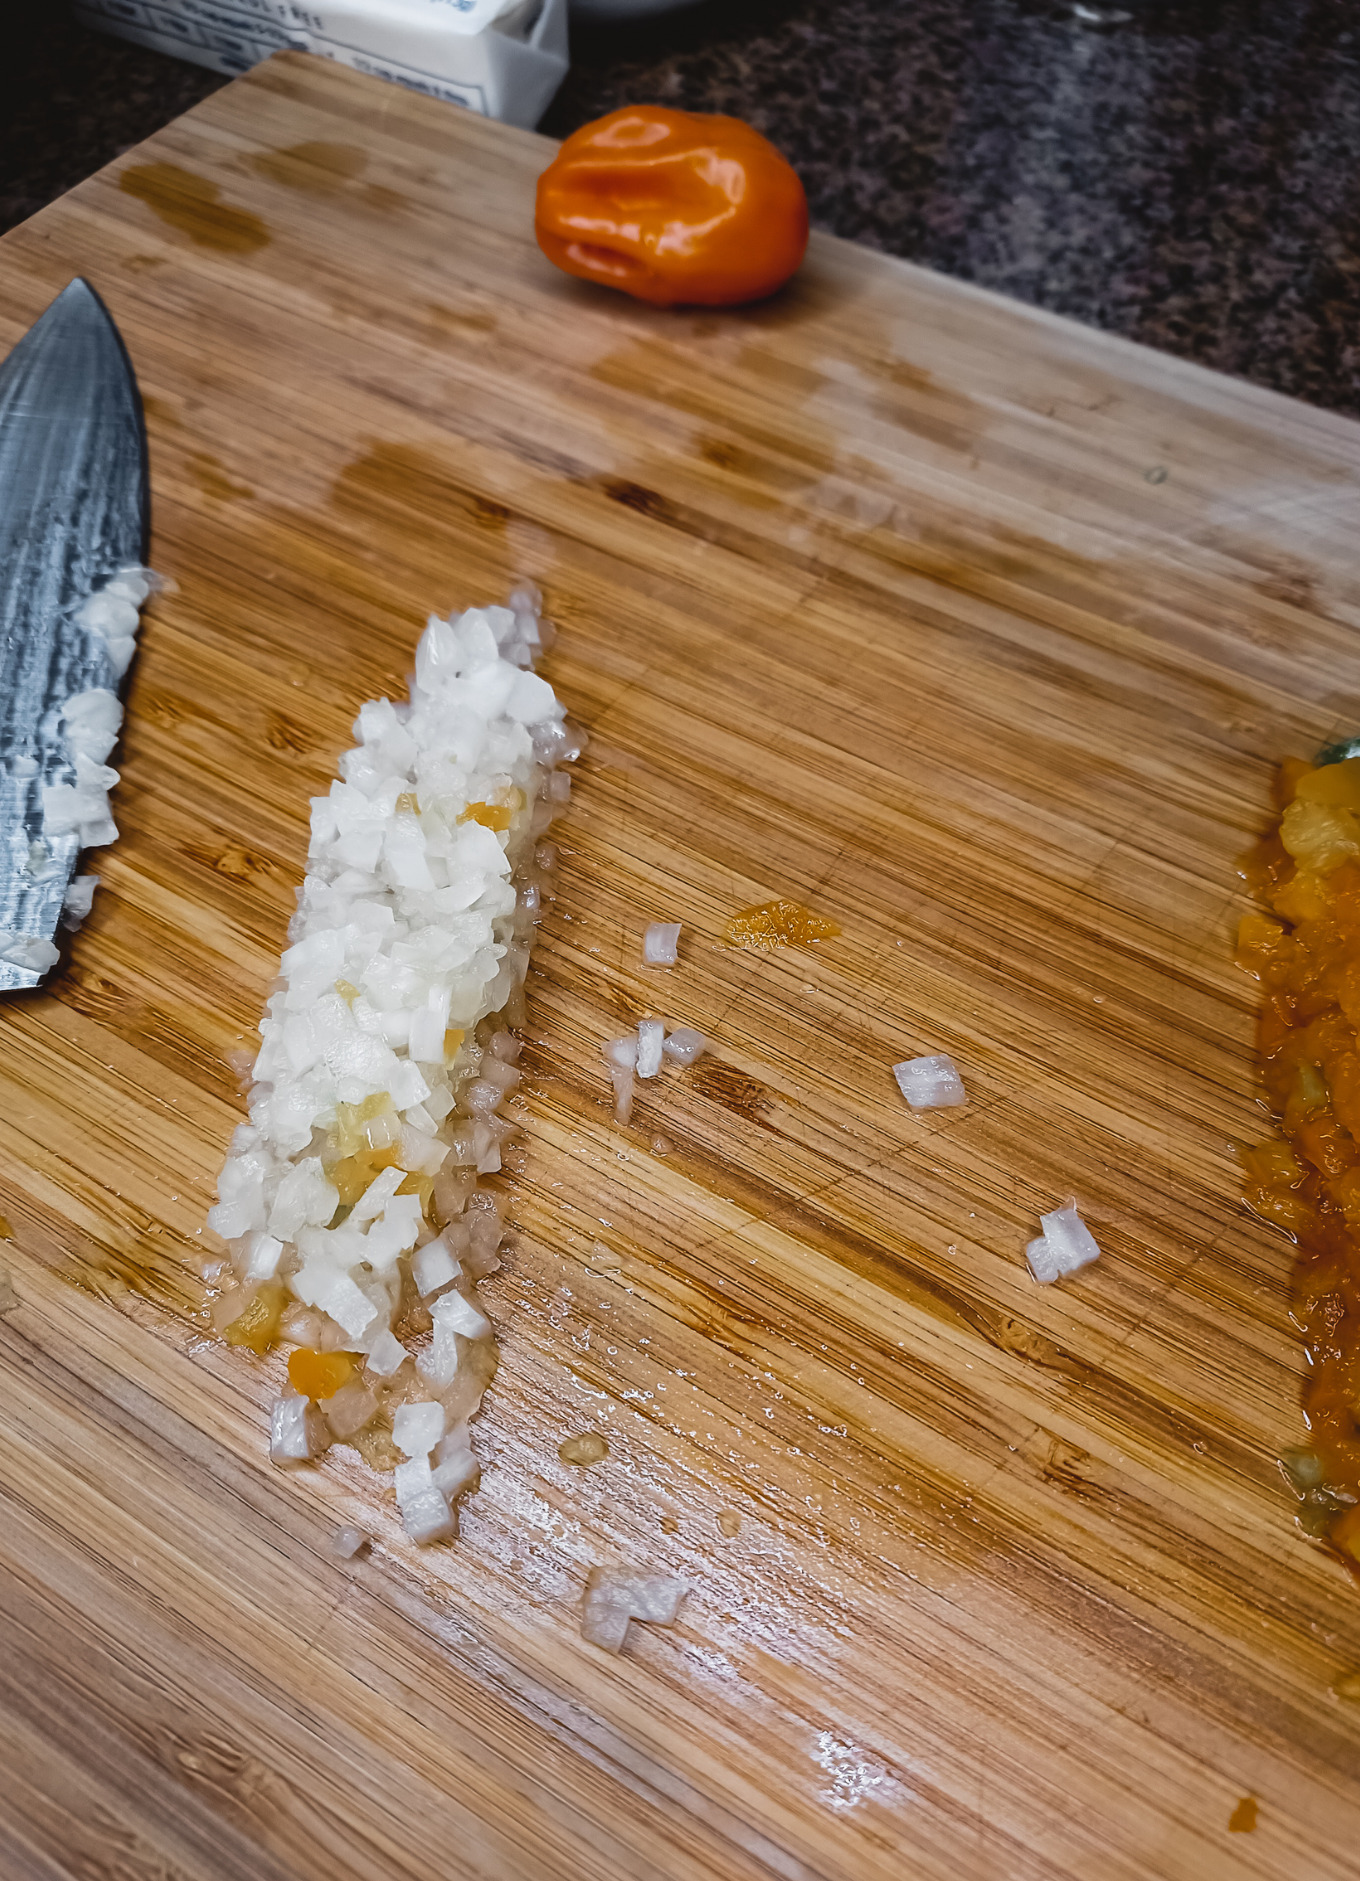 A cutting board with a knife, habanero pepper and onion.